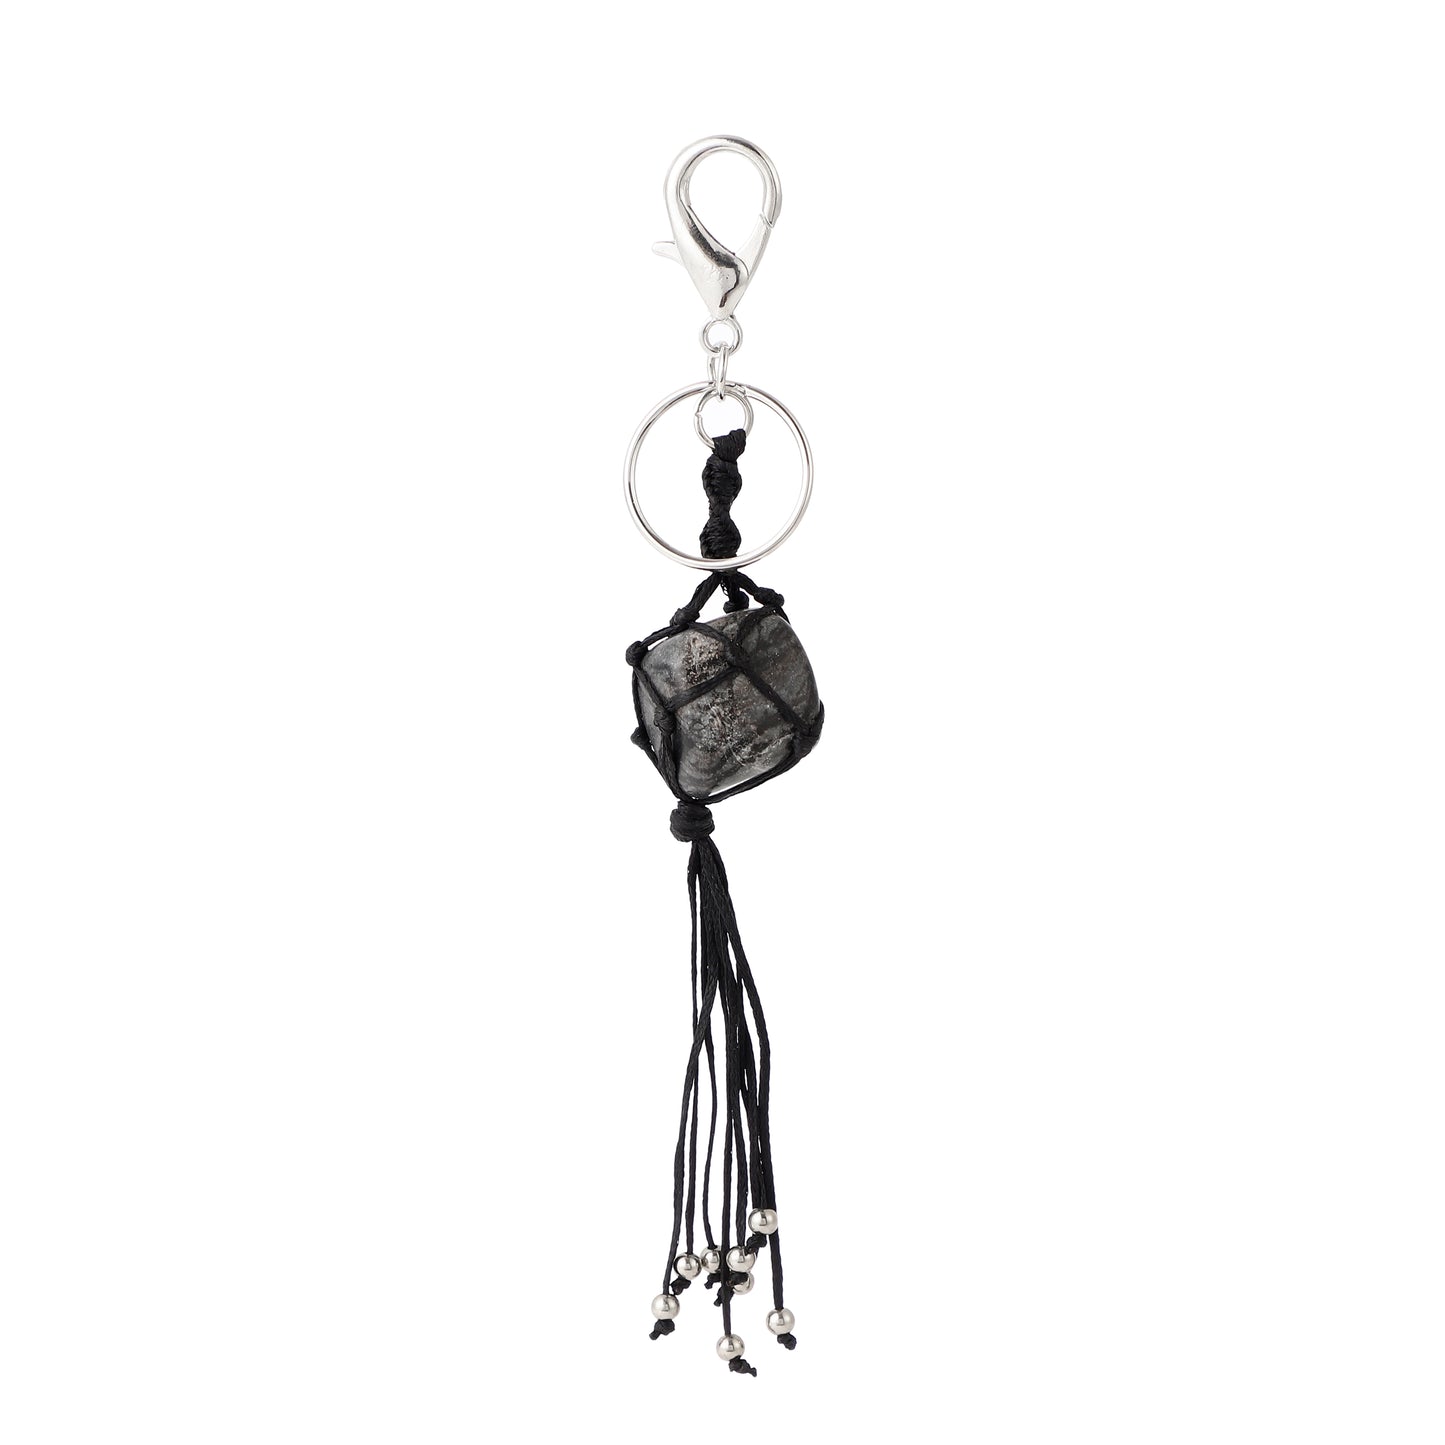 Stylish Weaved Keychain - Carry Your Keys with Elegance and Durability